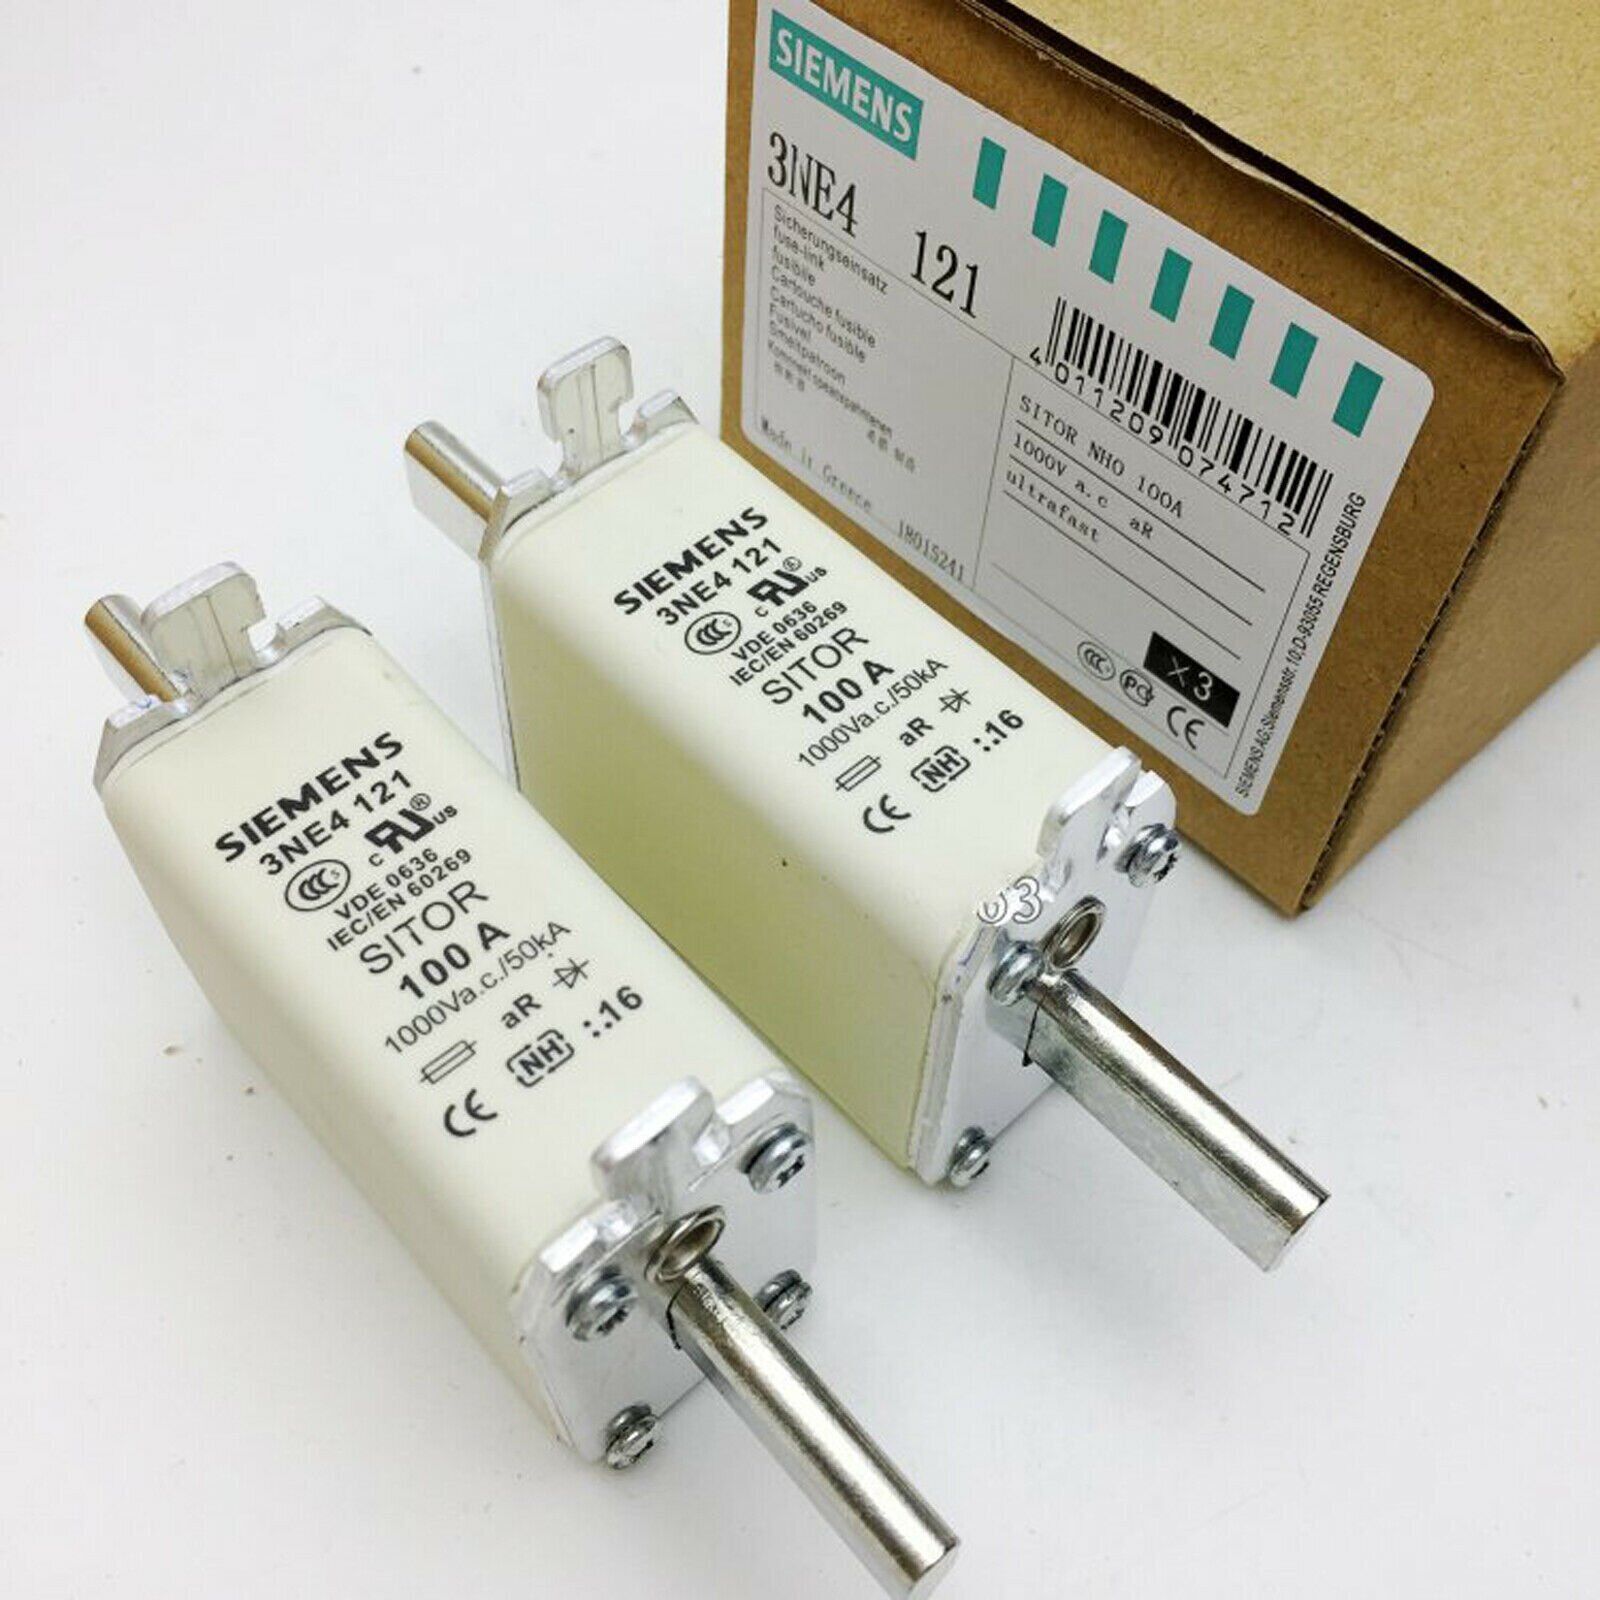 new ONE   in box Siemens 3NE4121 100A One year FAST SHIP